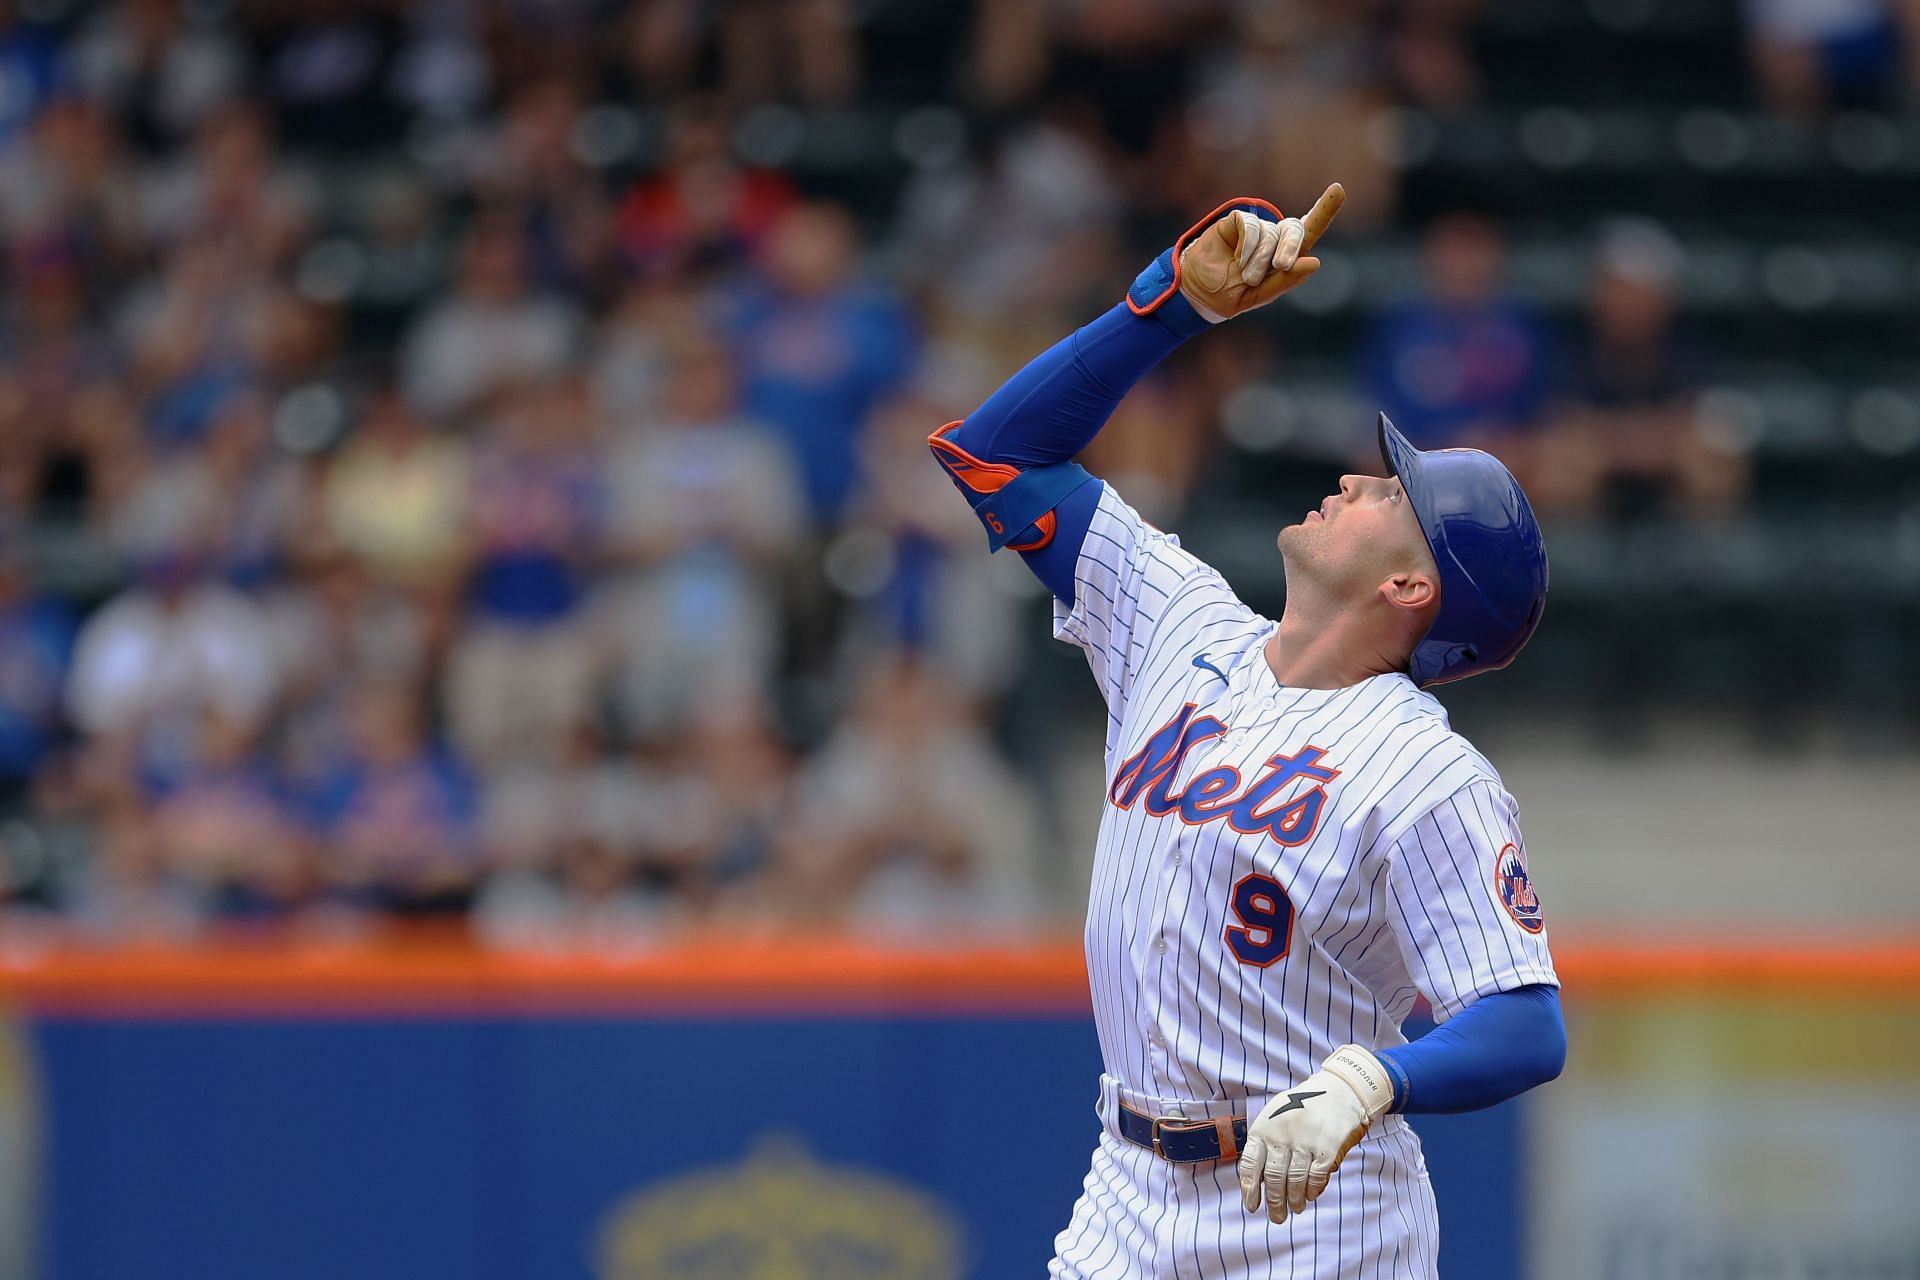 Mets' Nimmo to play for Italy in World Baseball Classic, High School